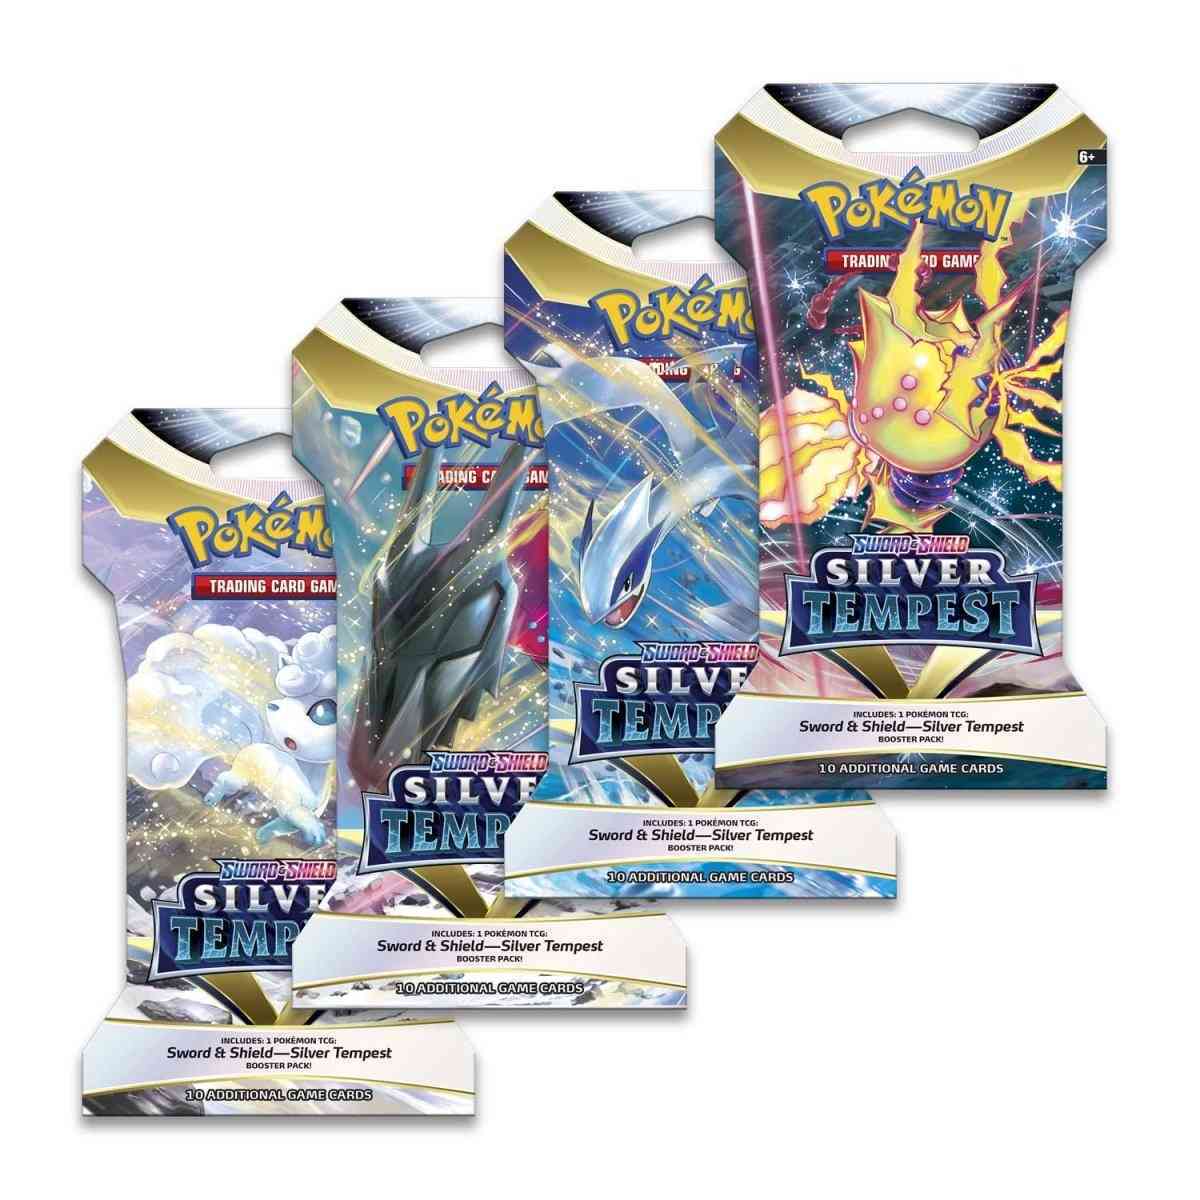 Pokémon TCG: Sword & Shield - Silver Tempest Sleeved Booster Pack (10 Cards)